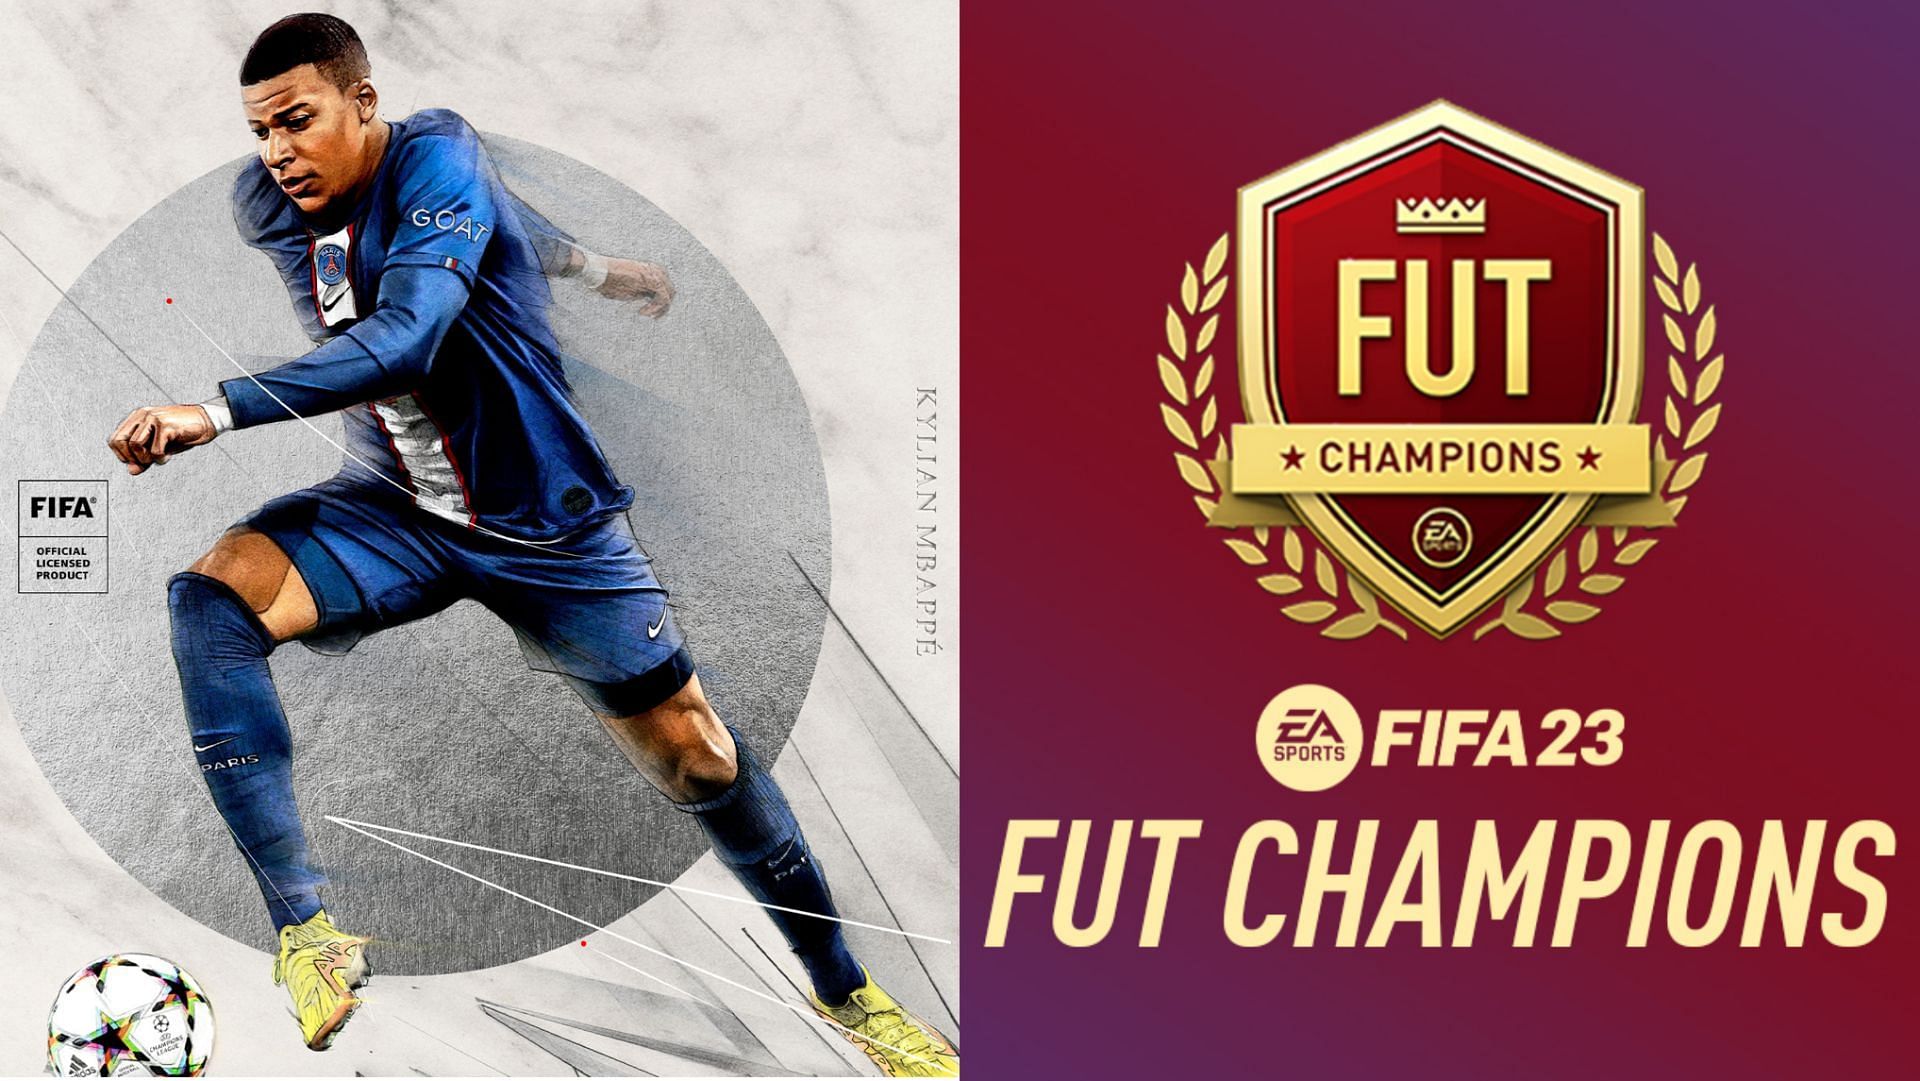 FIFA 23 leaks reveal concept of Twin Mini Releases for FUT